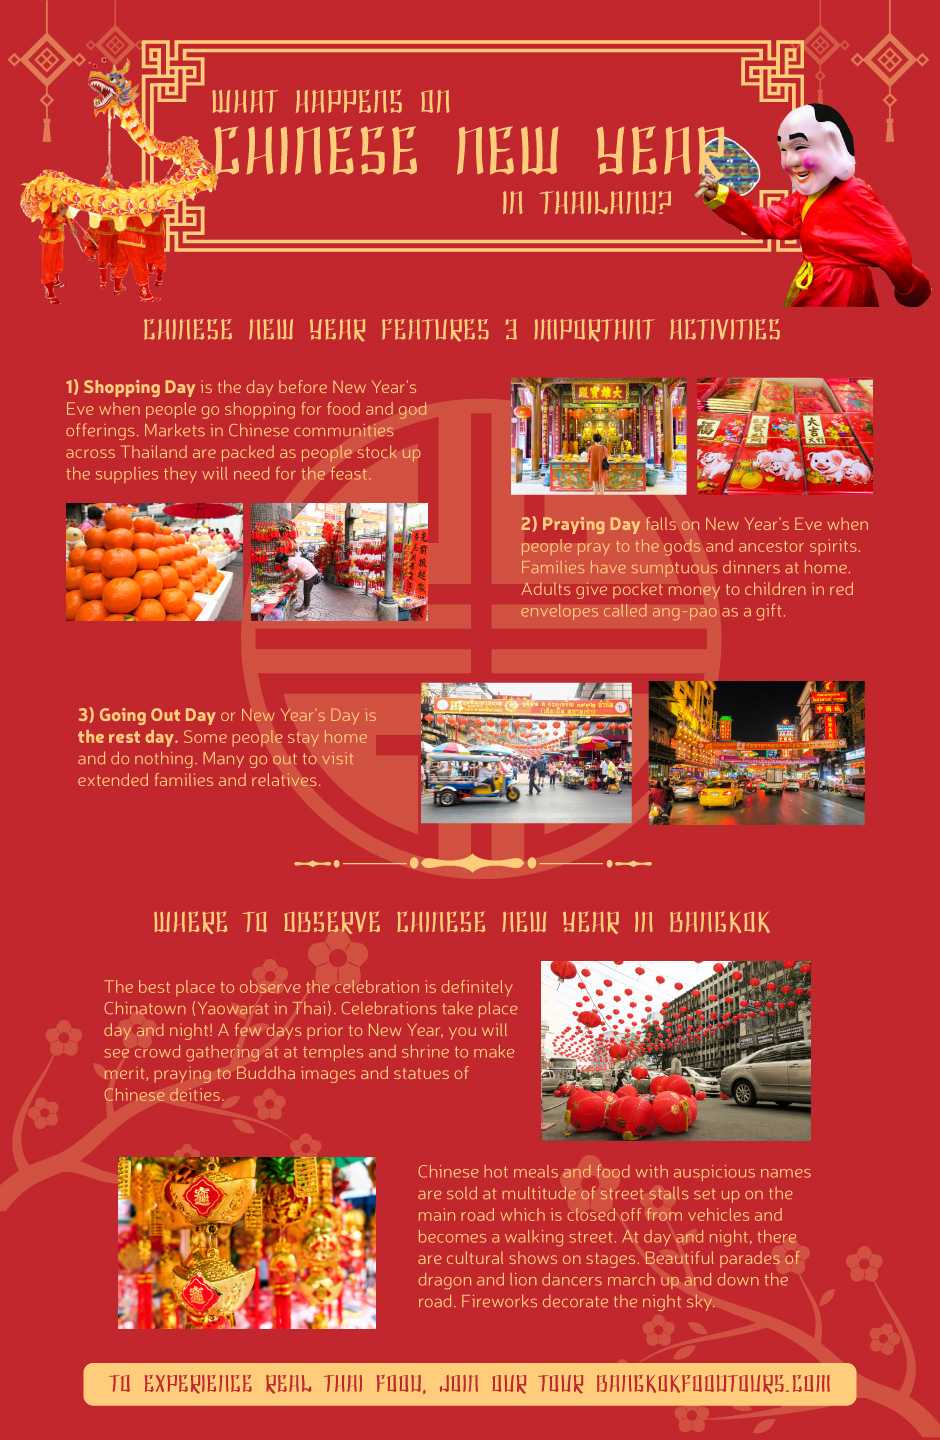 Thailand Food Tours on Twitter: 'HAPPY CHINESE NEW YEAR 2019 🏮🎉🎊 Check  out this info graphic and our blog👉👉https://t.co/BZOEnpAys0 for where to  see the celebration in Bangkok.💃🌇 We wish you prosperity and